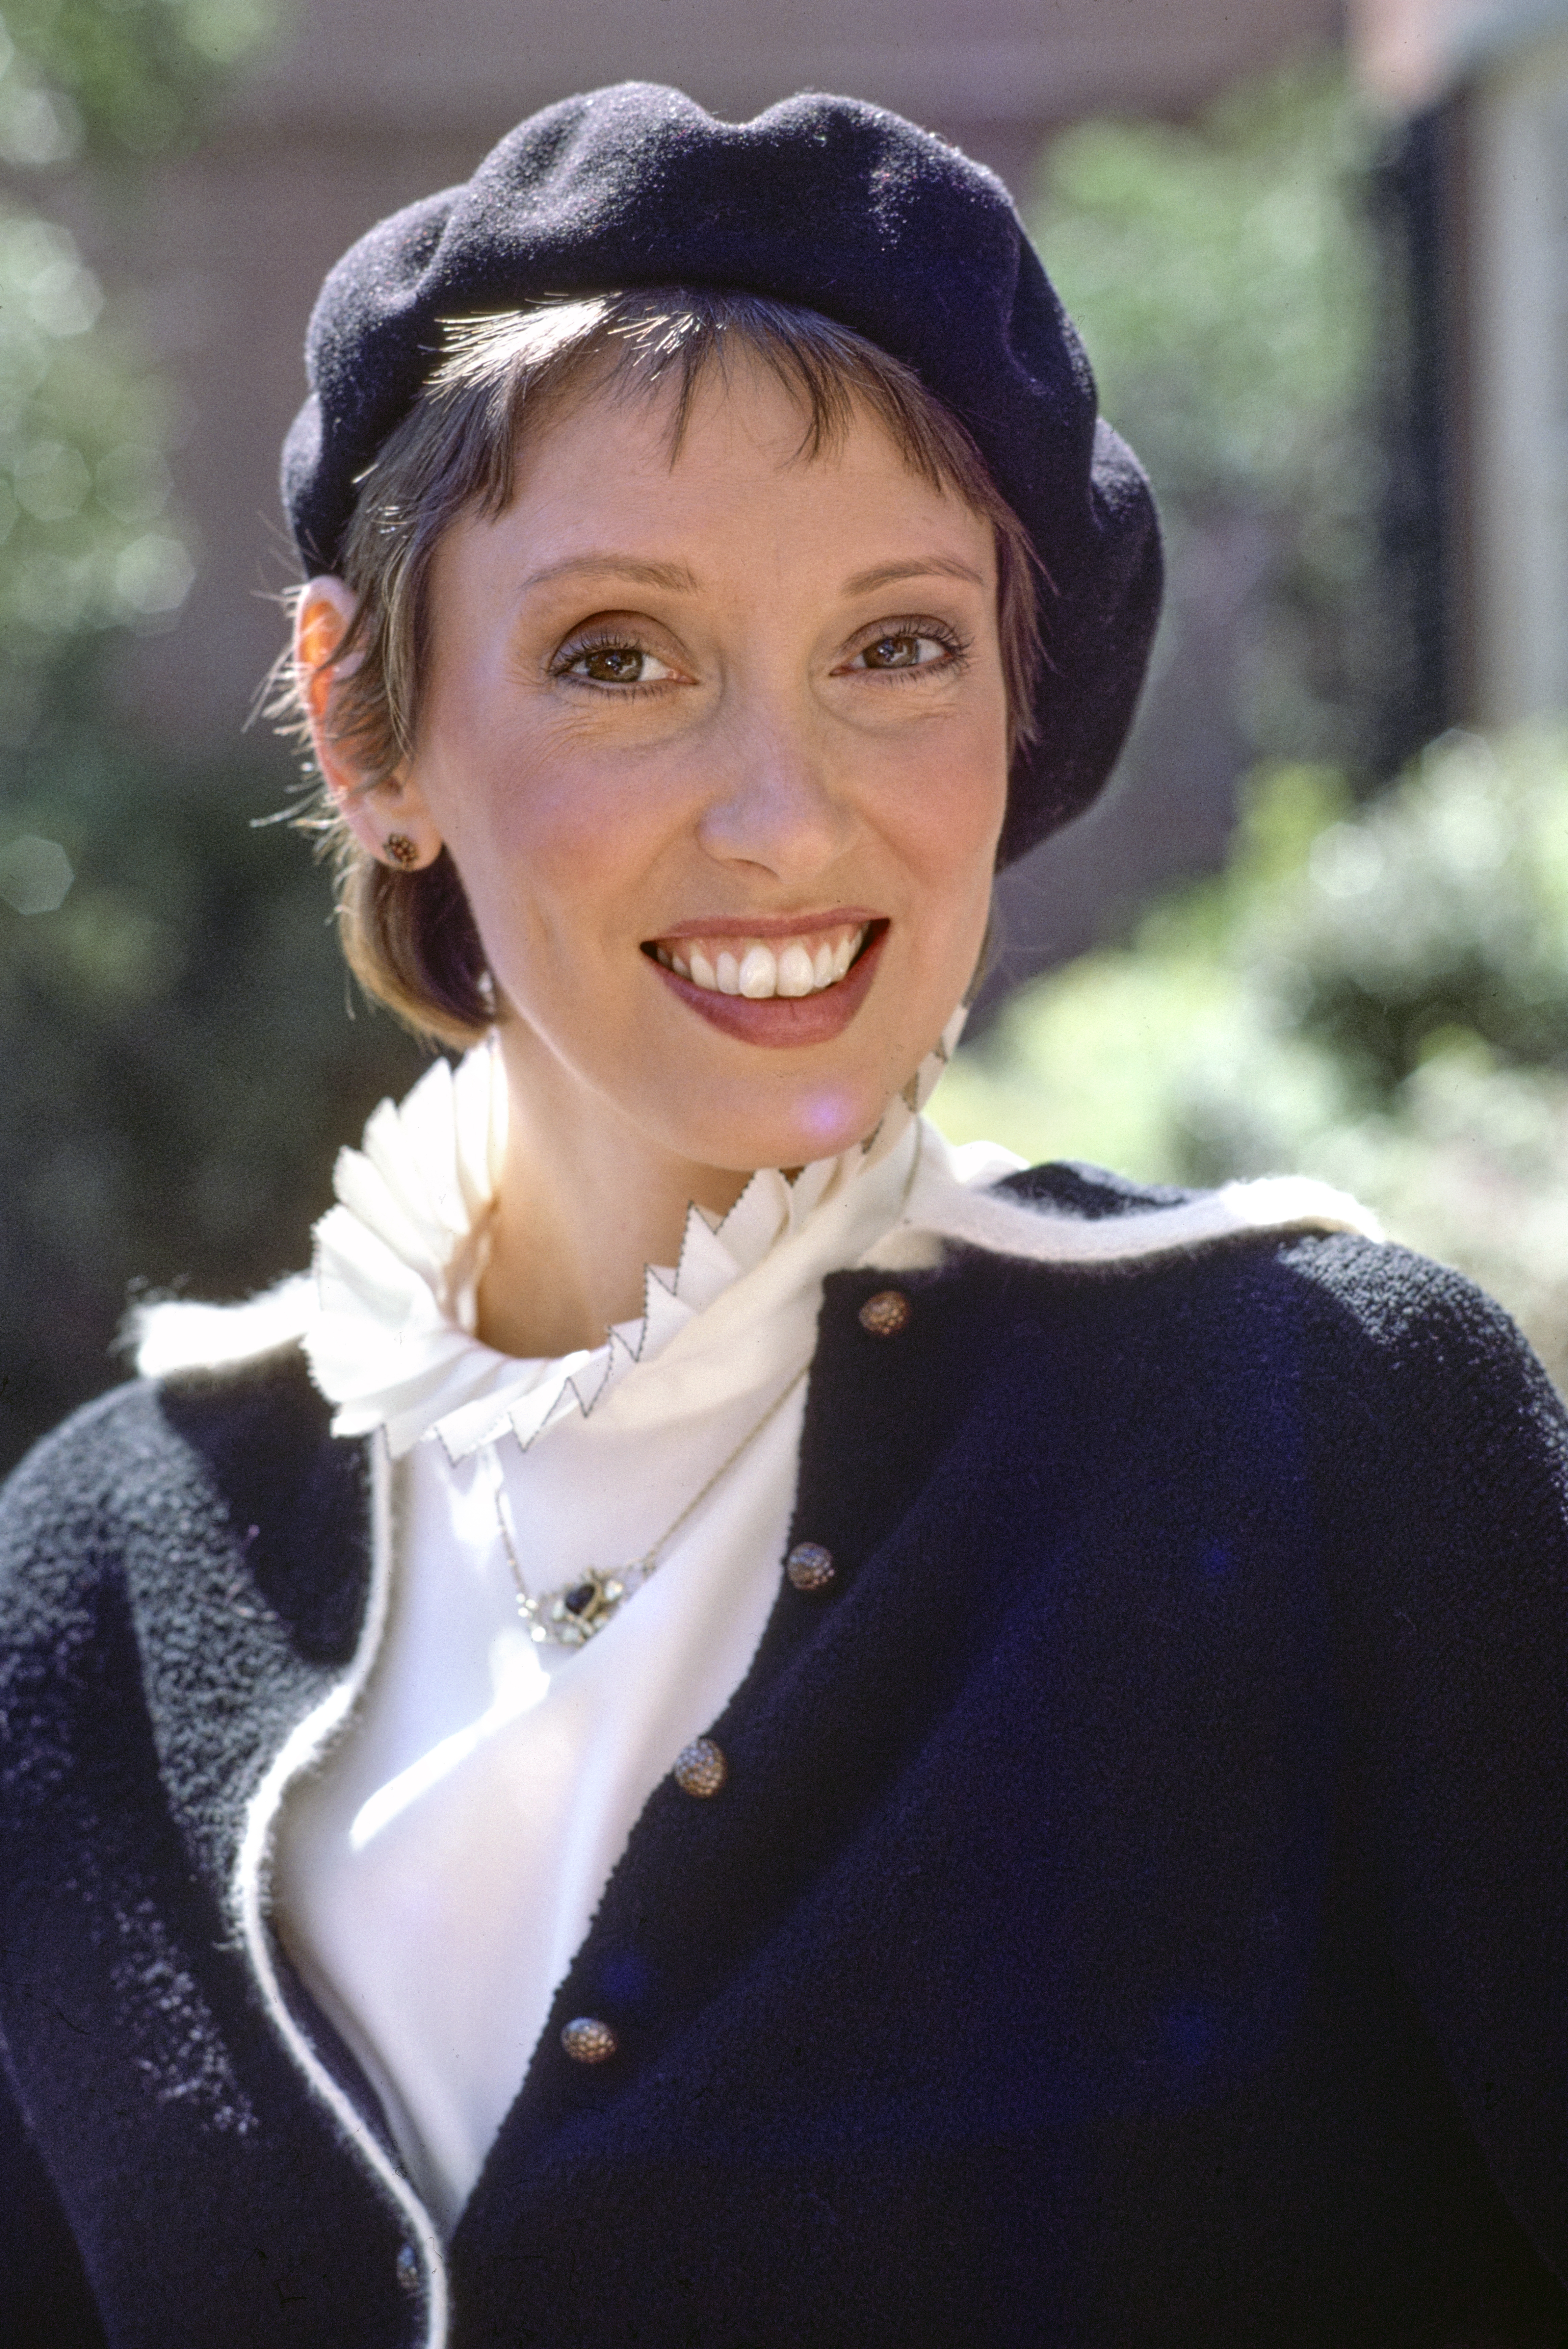 Shelley Duvall poses on June 14, 1986 in Washington, D.C. | Source: Getty Images